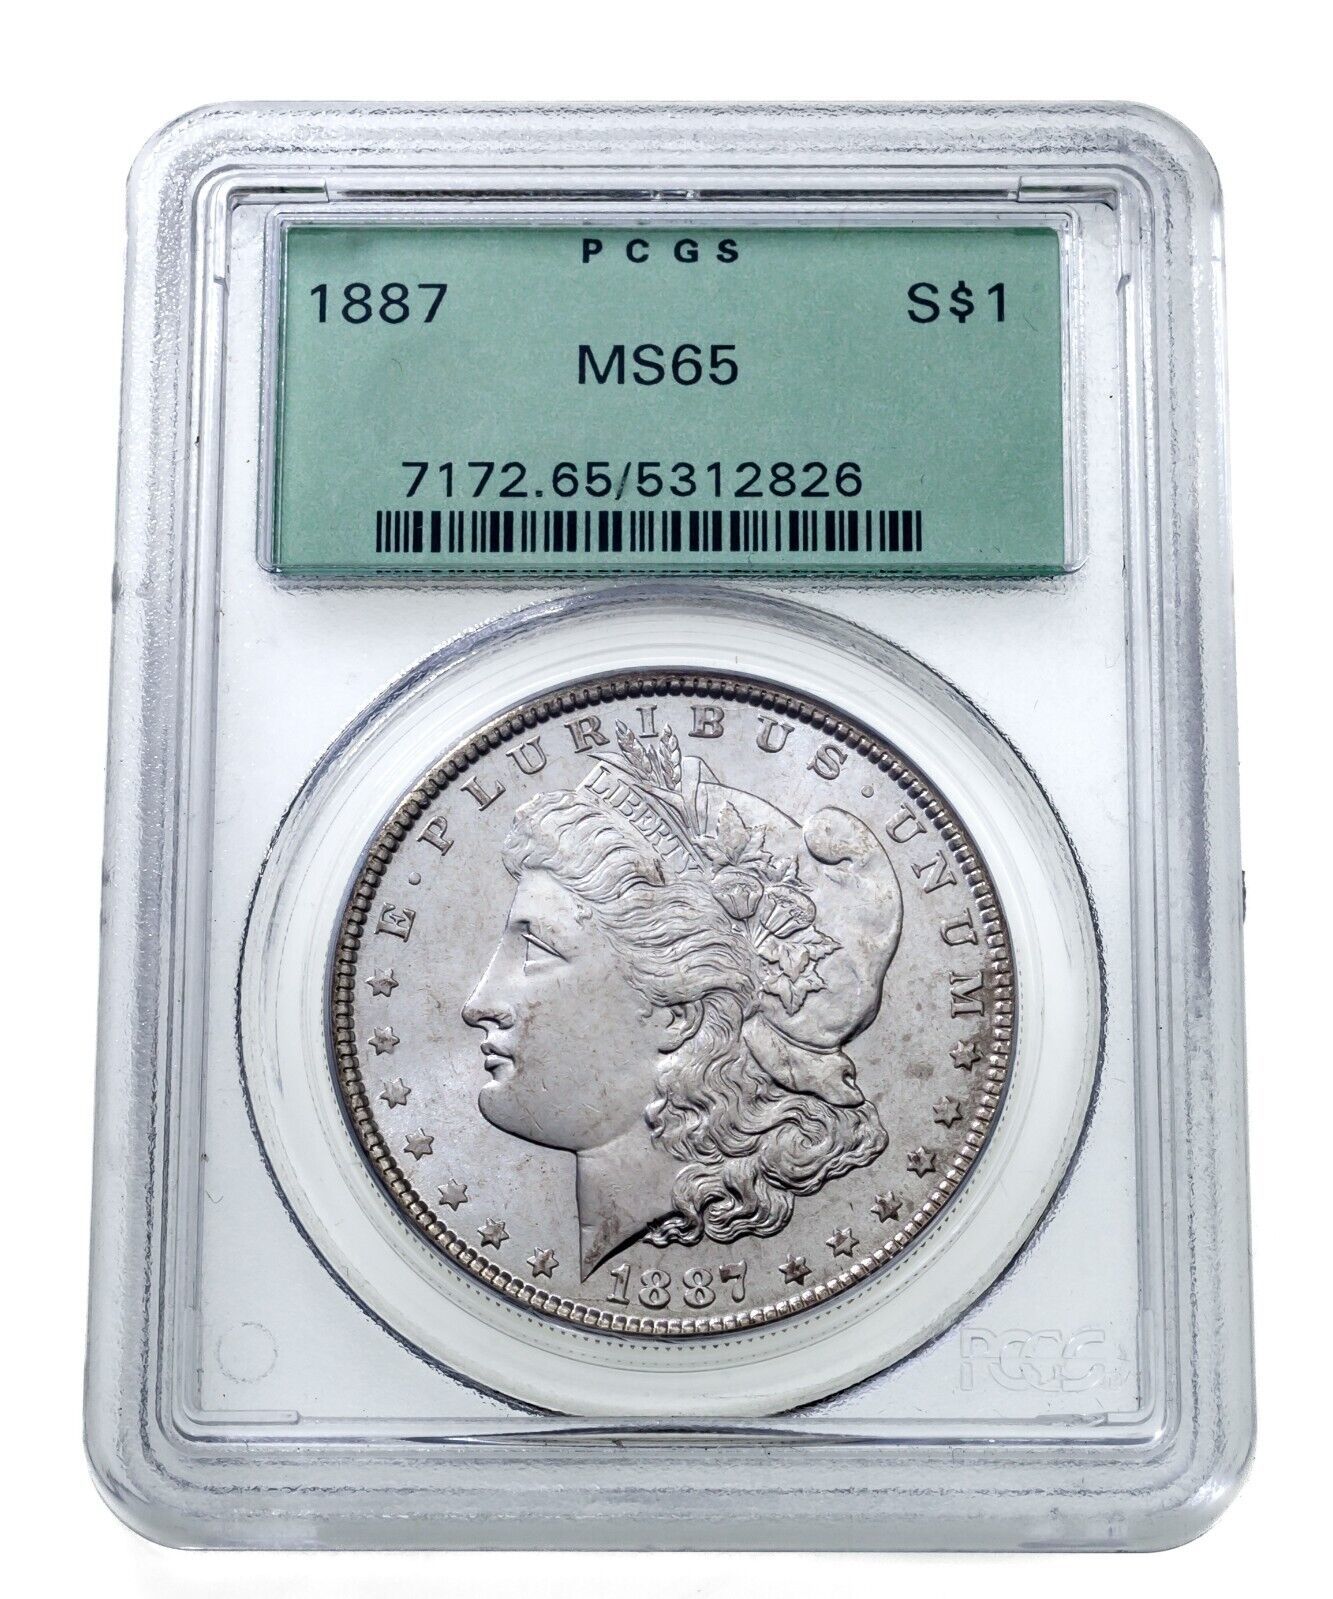 Primary image for 1887 $1 Silver Morgan Dollar Graded by PCGS as MS65 Green Label!